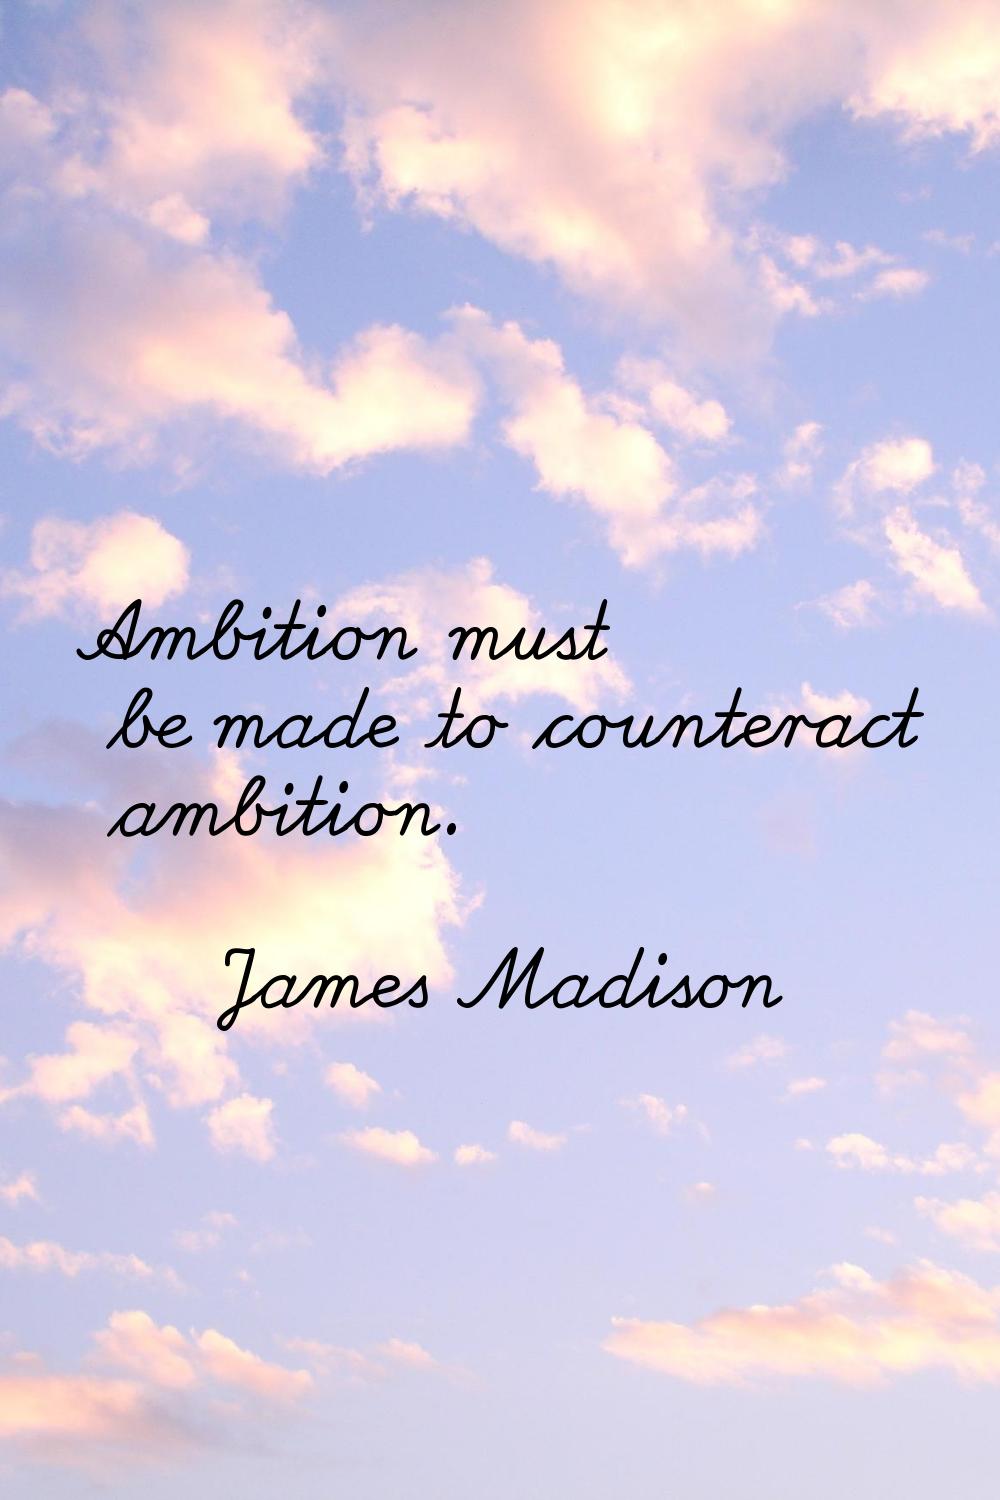 Ambition must be made to counteract ambition.